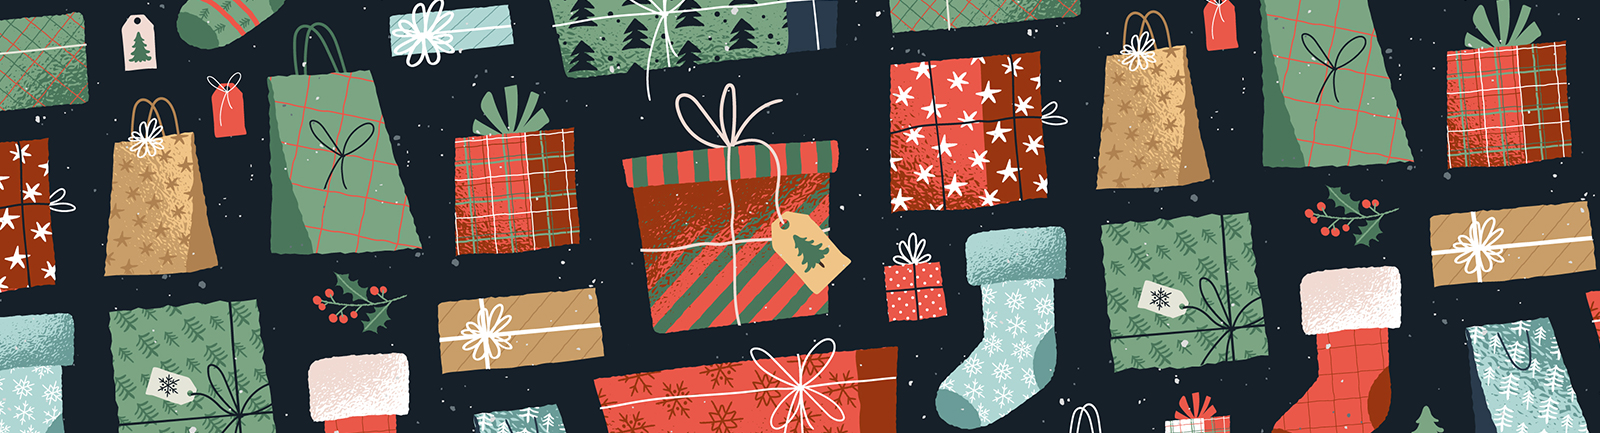 8 Christmas Gift Product Ideas to Sell on Print-on-demand